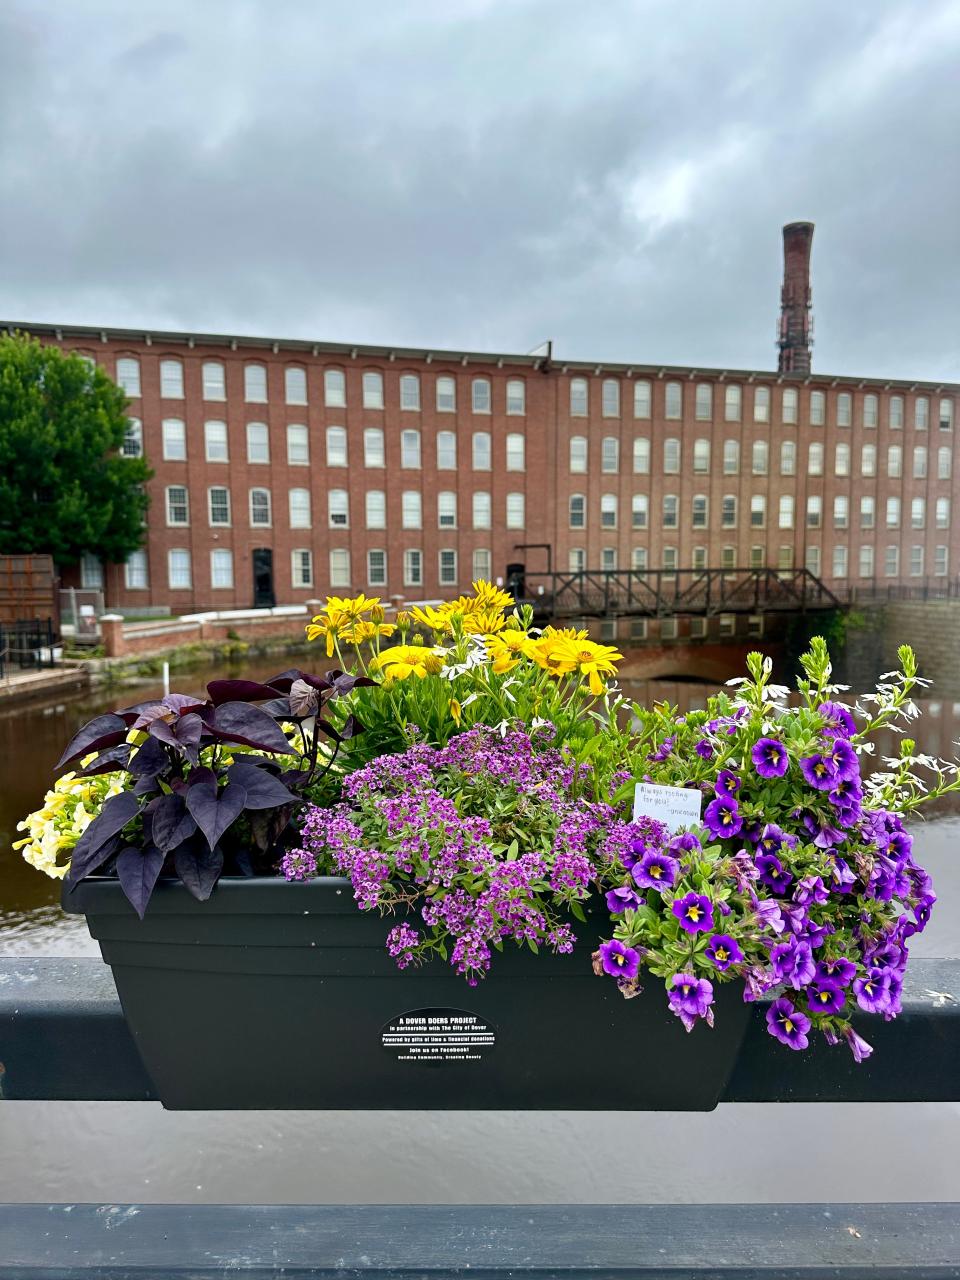 One of a number of flower boxes in Dover, lovingly created and cared for by community members, that have been repeatedly vandalized.